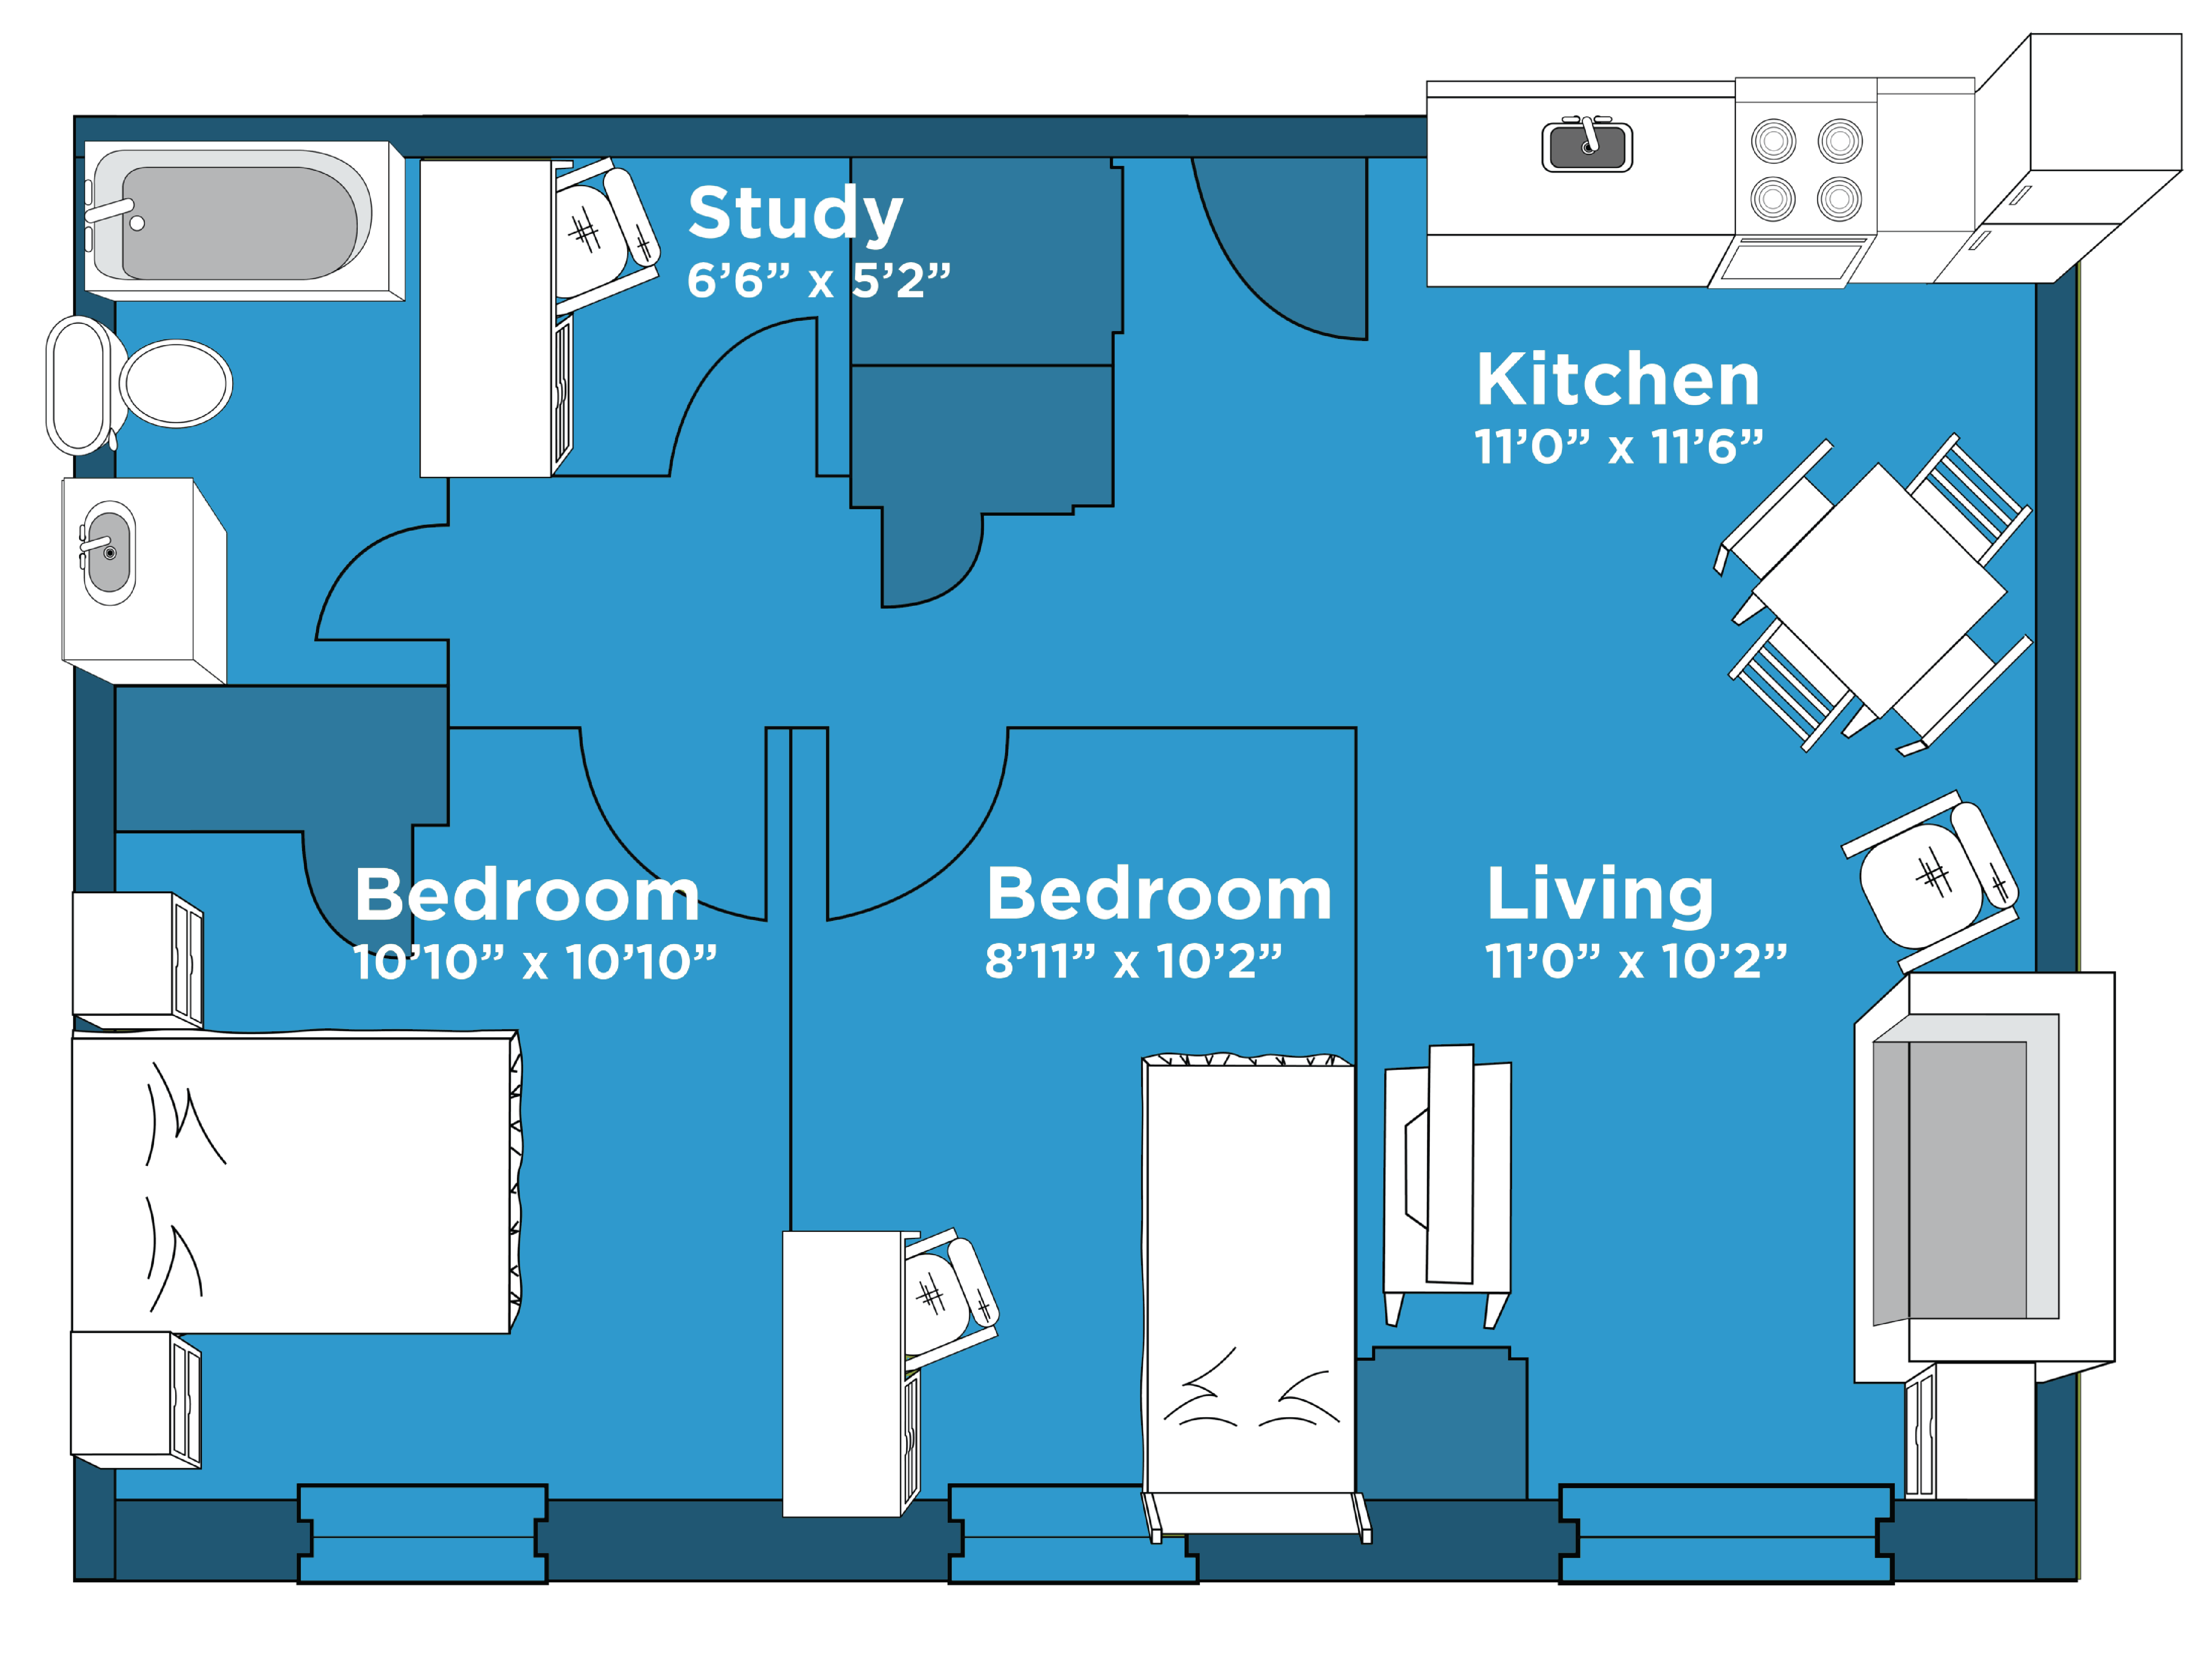 2 bedroom shared suite or apartment layout 